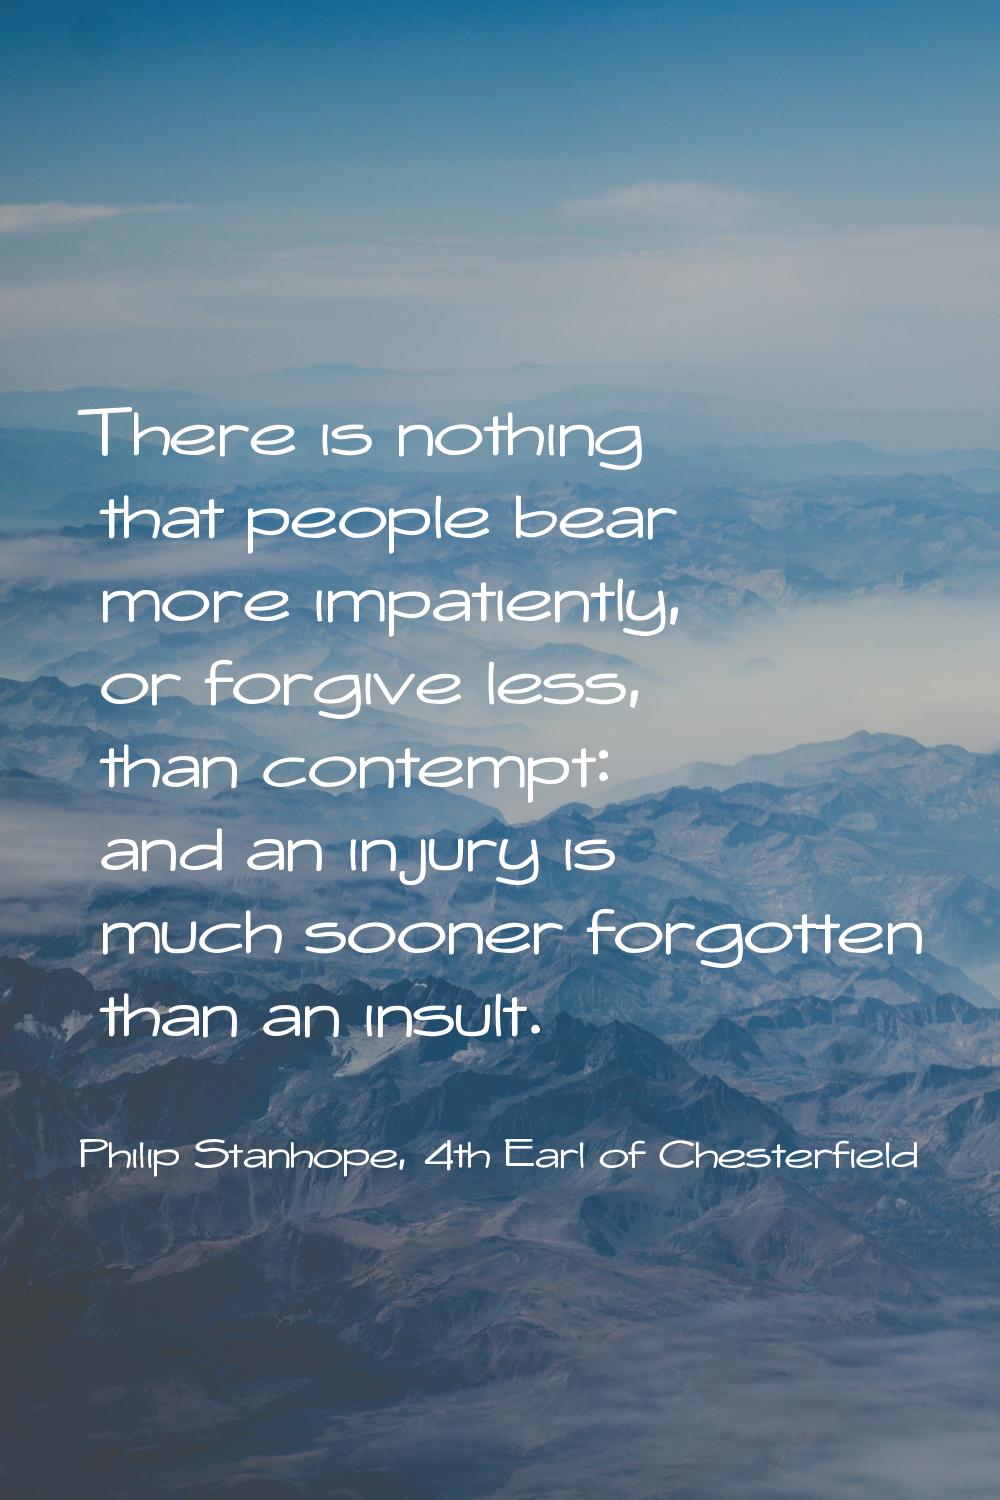 There is nothing that people bear more impatiently, or forgive less, than contempt: and an injury i